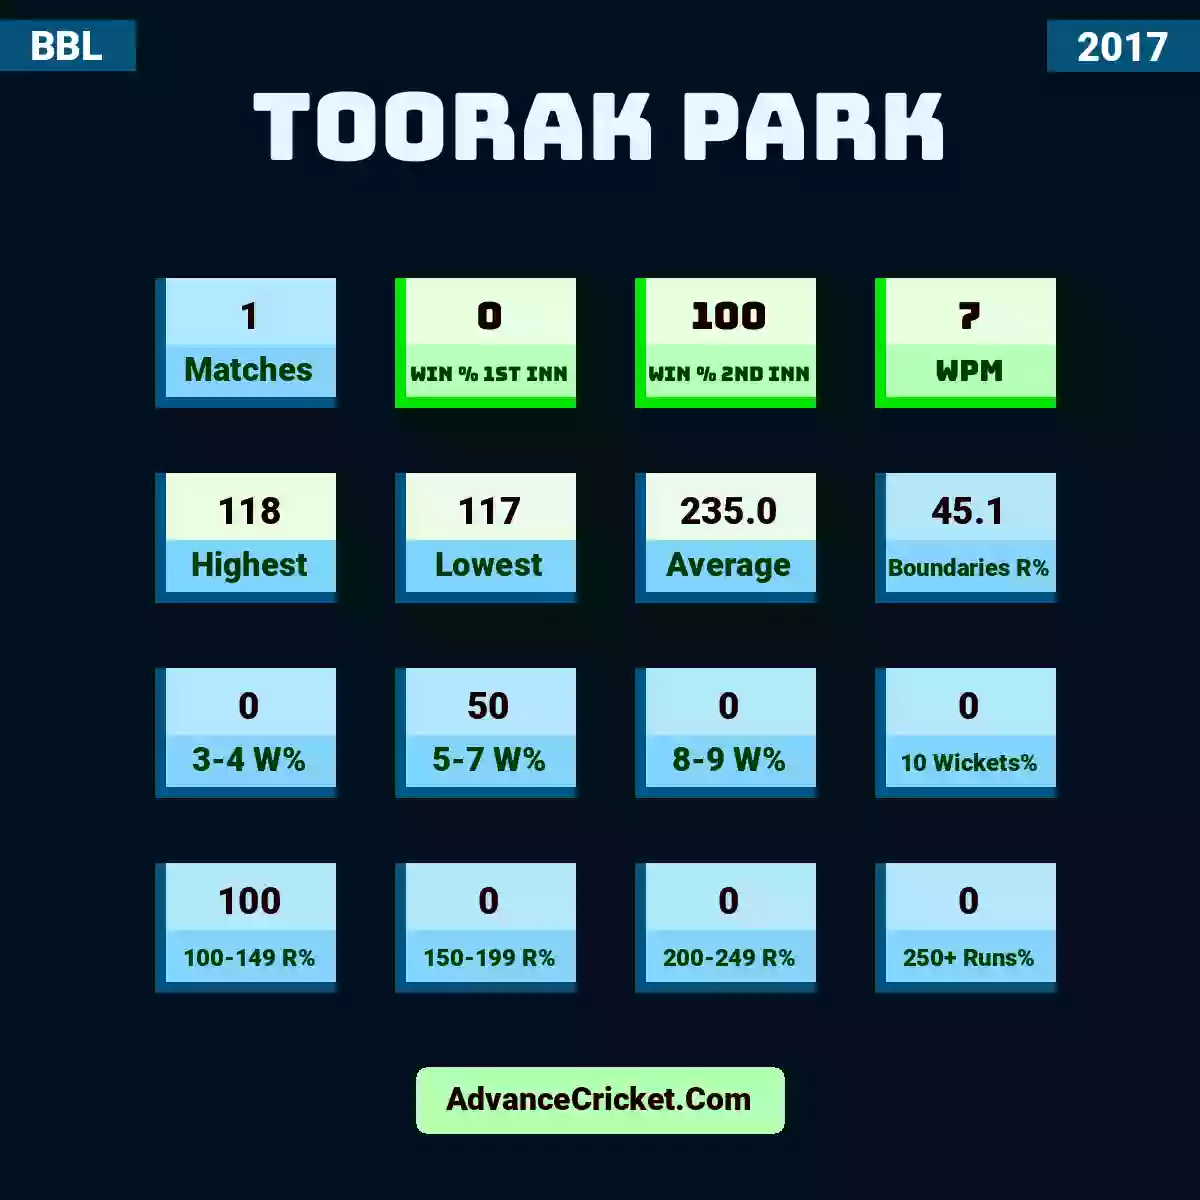 Image showing Toorak Park with Matches: 1, Win % 1st Inn: 0, Win % 2nd Inn: 100, WPM: 7, Highest: 118, Lowest: 117, Average: 235.0, Boundaries R%: 45.1, 3-4 W%: 0, 5-7 W%: 50, 8-9 W%: 0, 10 Wickets%: 0, 100-149 R%: 100, 150-199 R%: 0, 200-249 R%: 0, 250+ Runs%: 0.